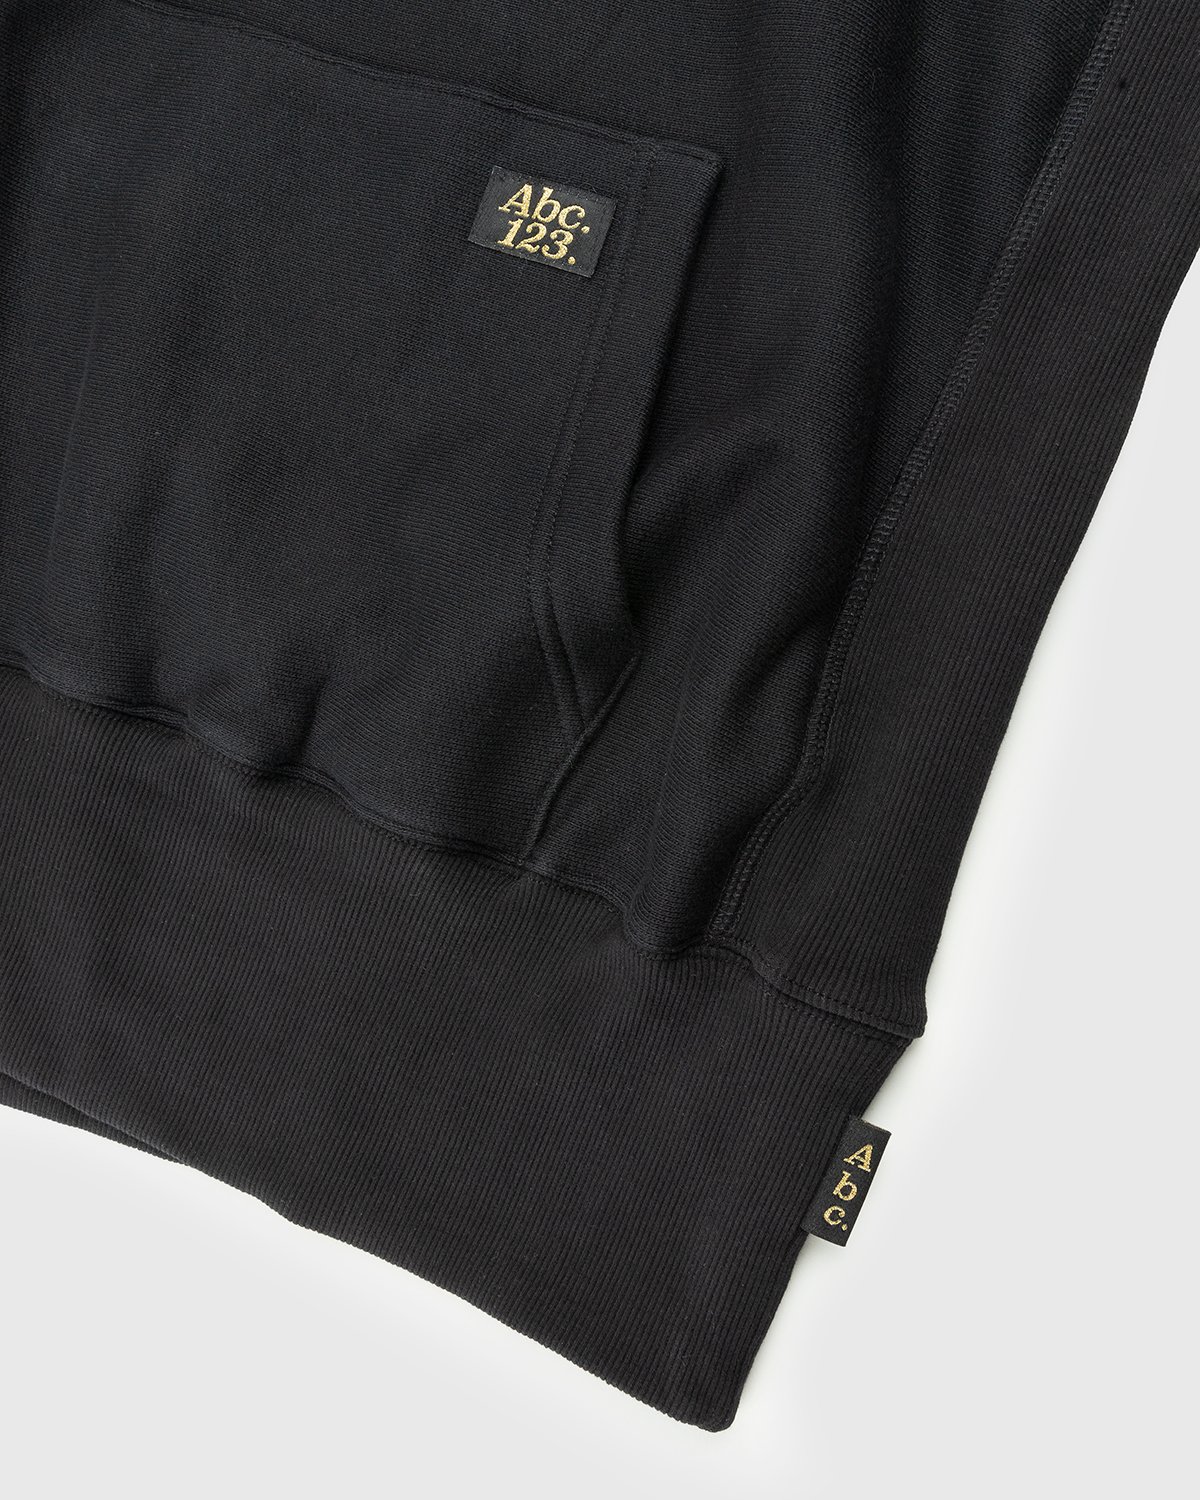 Abc. - Pullover Hoodie Anthracite - Clothing - Black - Image 4